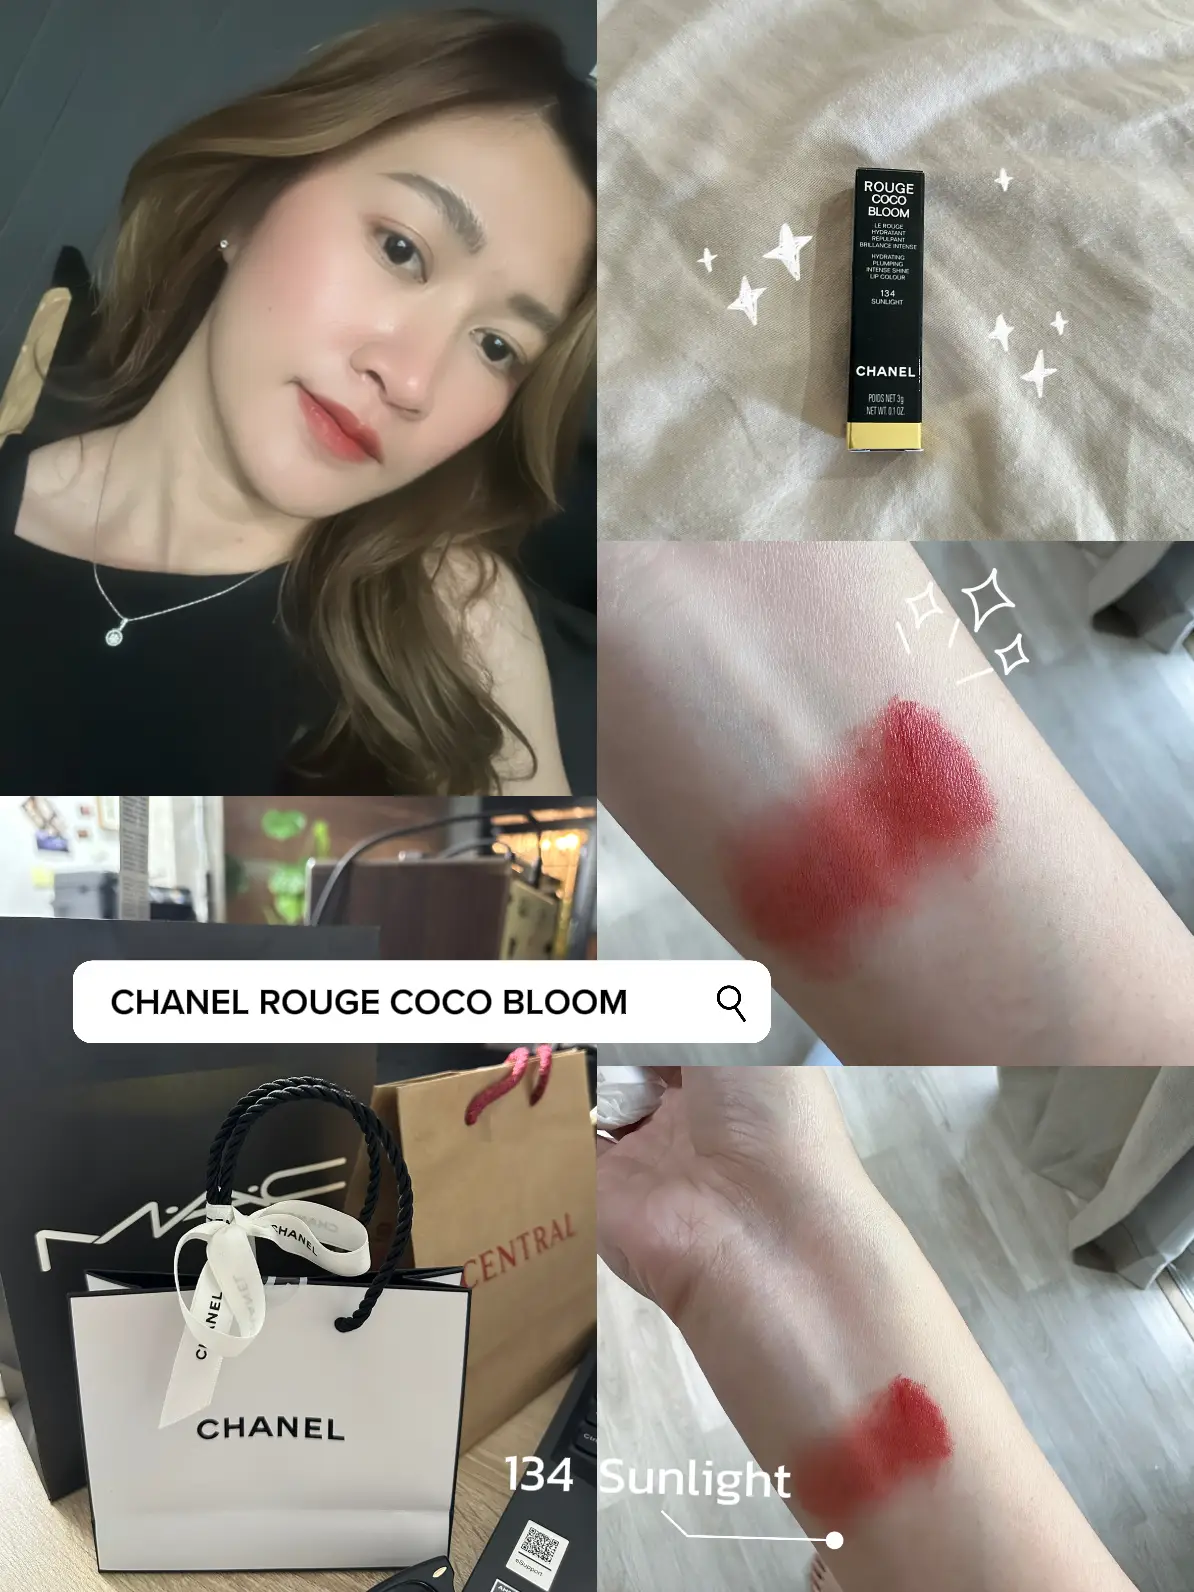 Chanel Coco Bloom Lipsticks Review